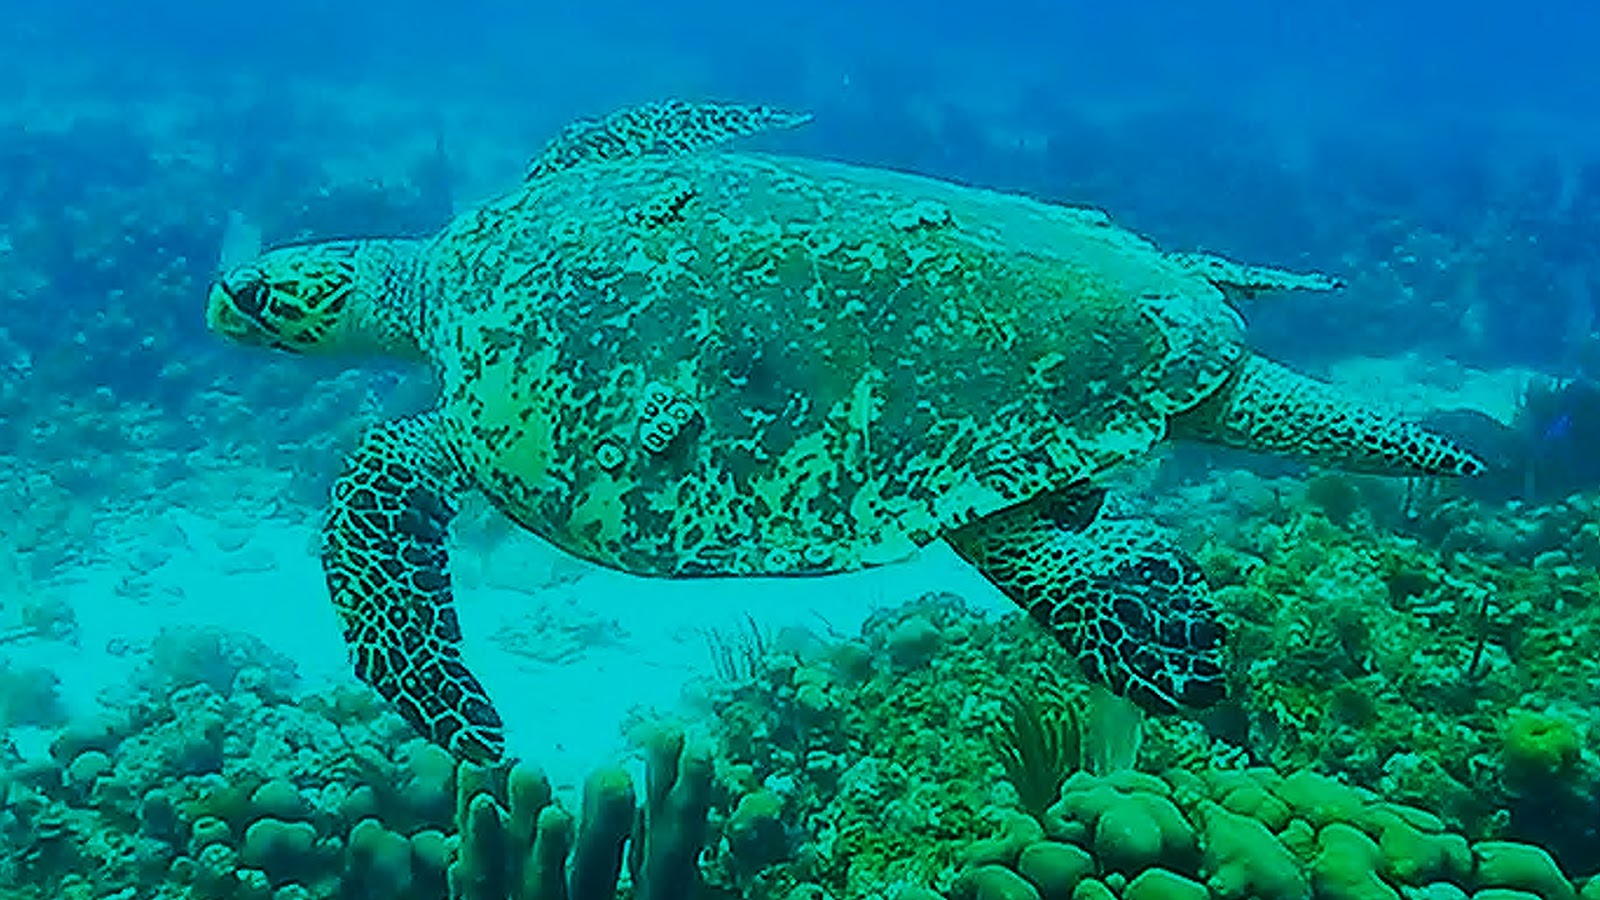 Aqua Action Blog: Turtle with a long tail!